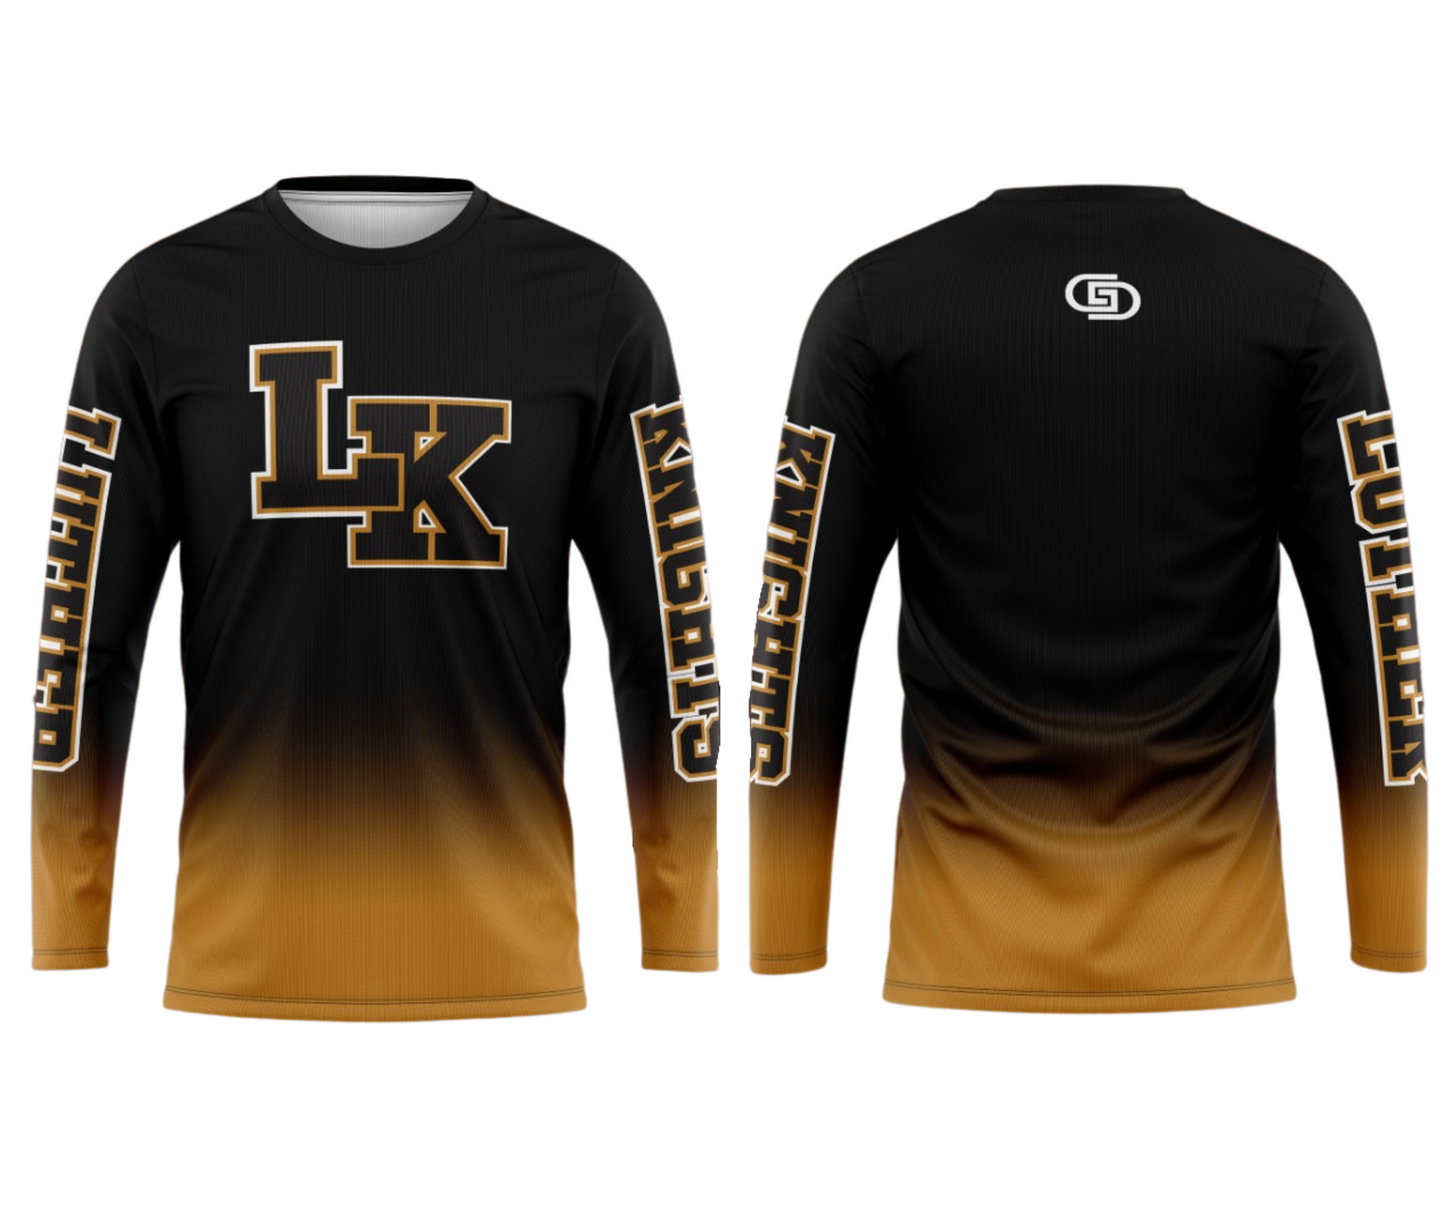 Luther Sublimated Long Sleeve